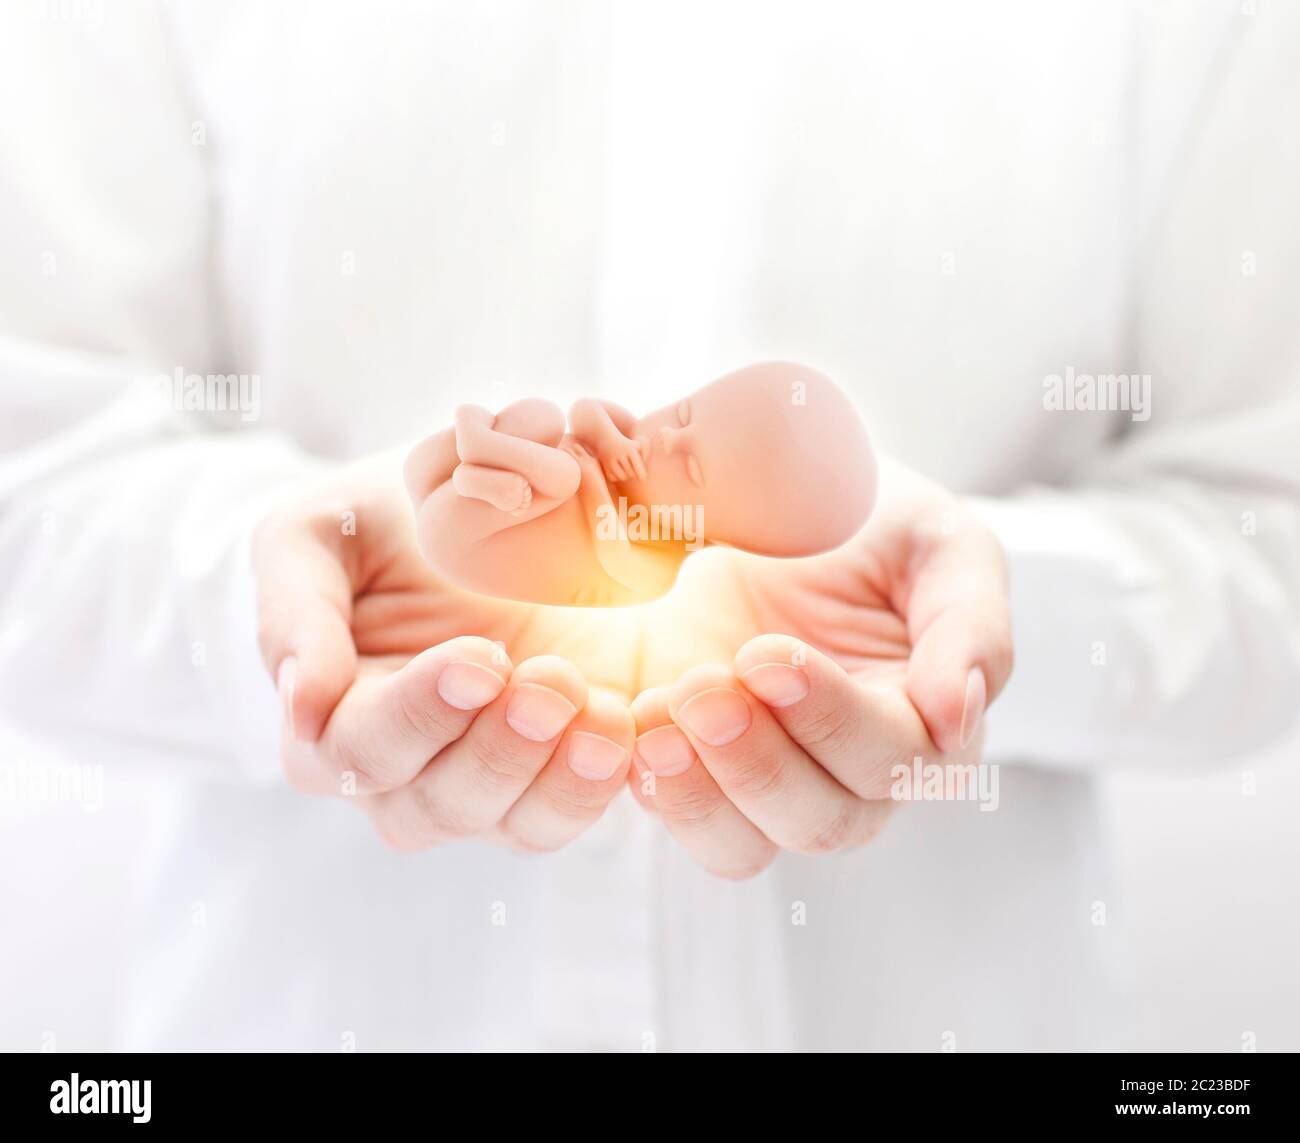 Human embryo in hands Stock Photo